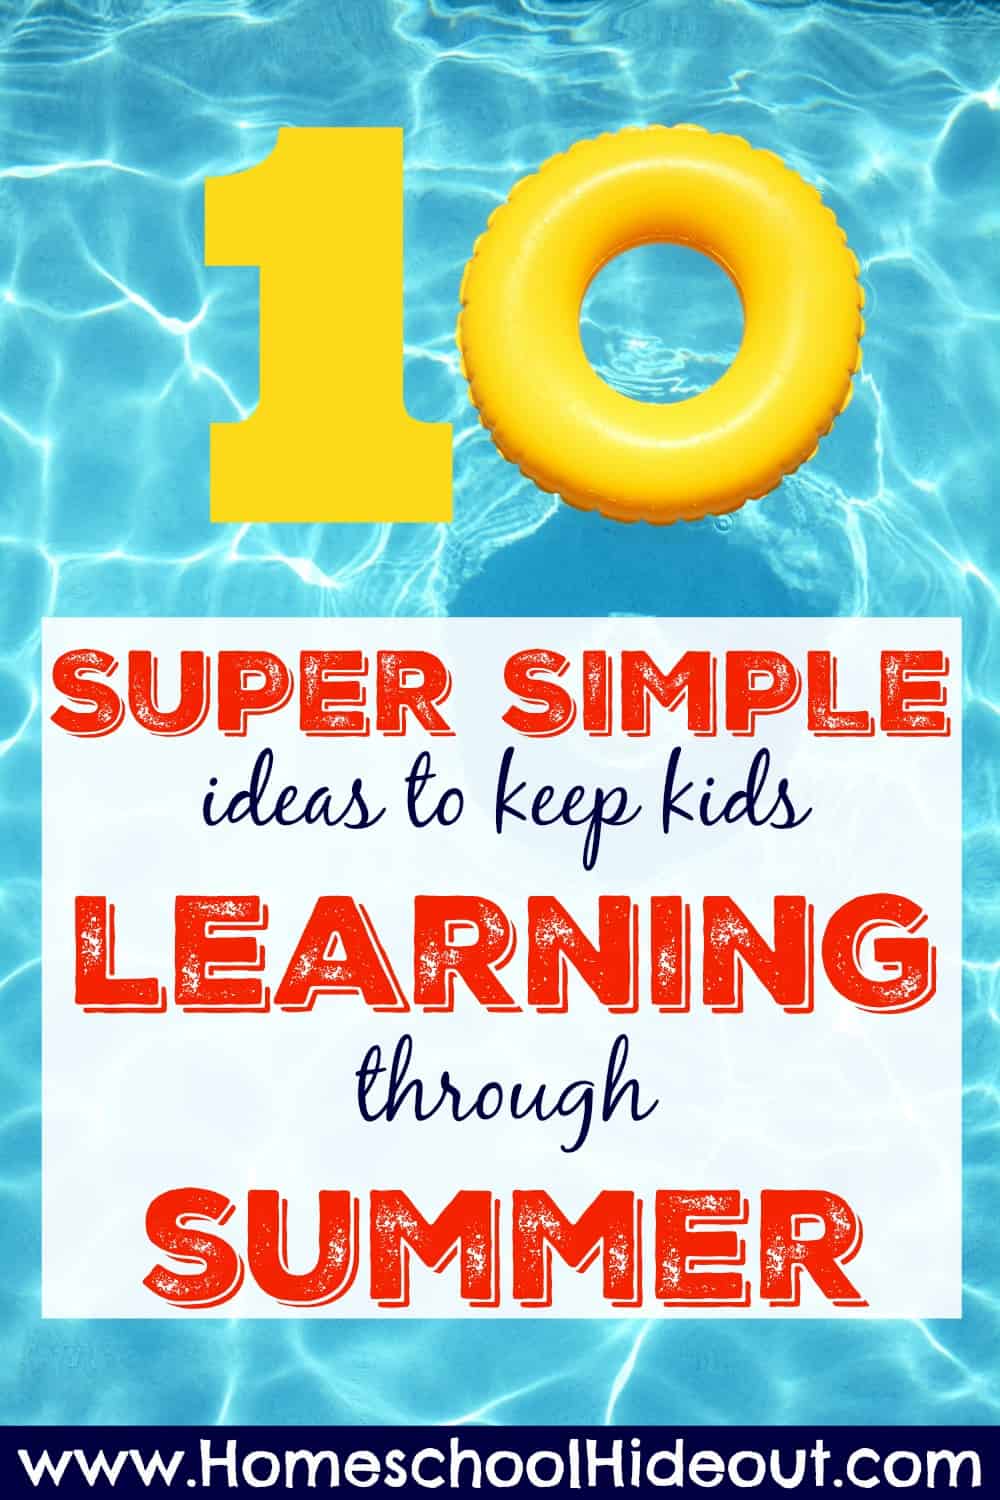 These tips are amazing! Keep the kids learning through summer while having a BLAST and making memories.